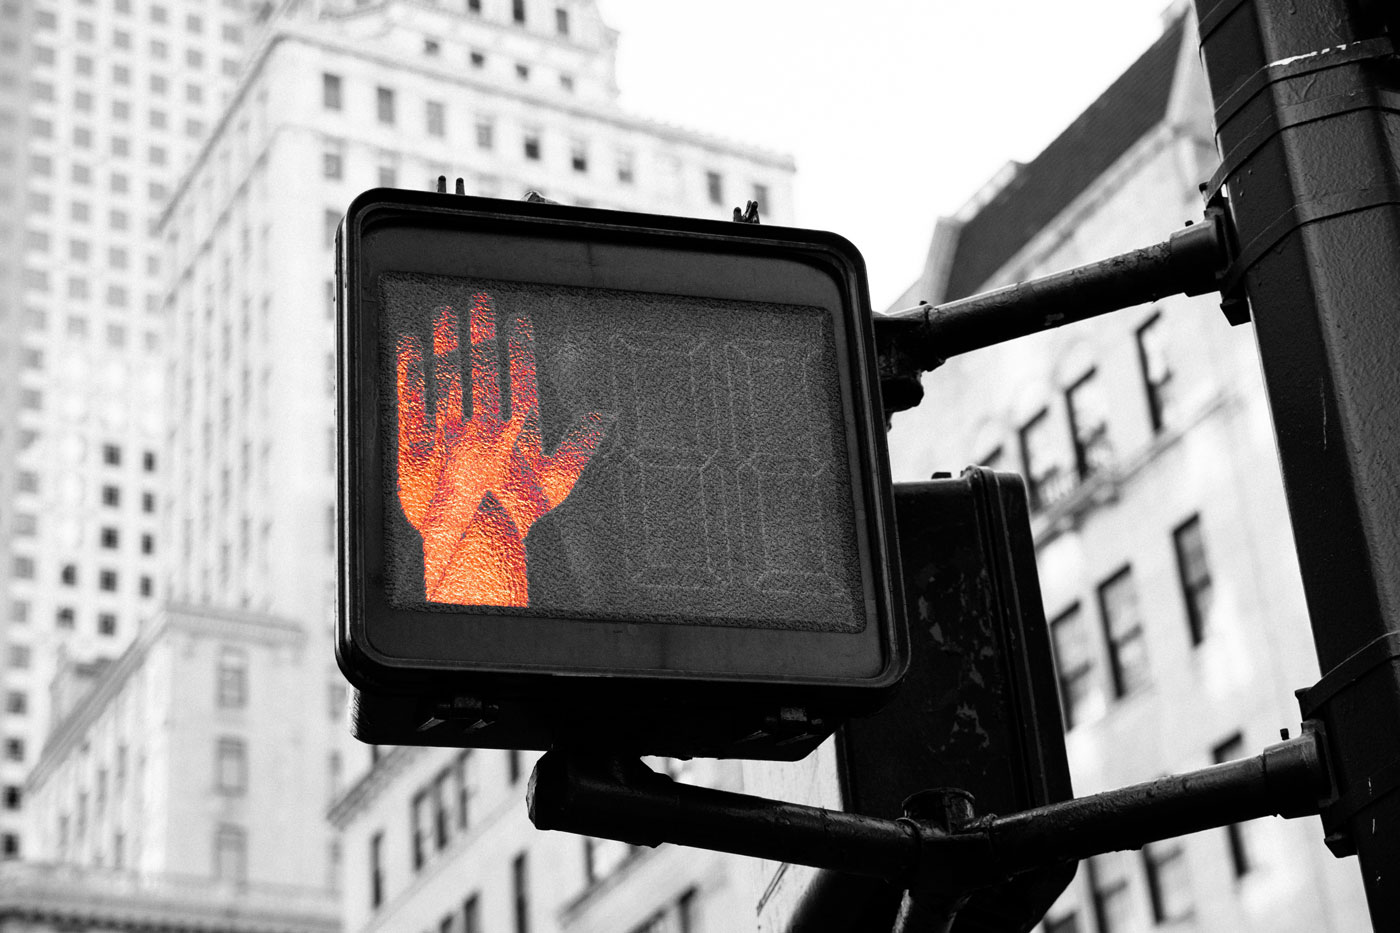 The sign of the red hand is on every street corner.